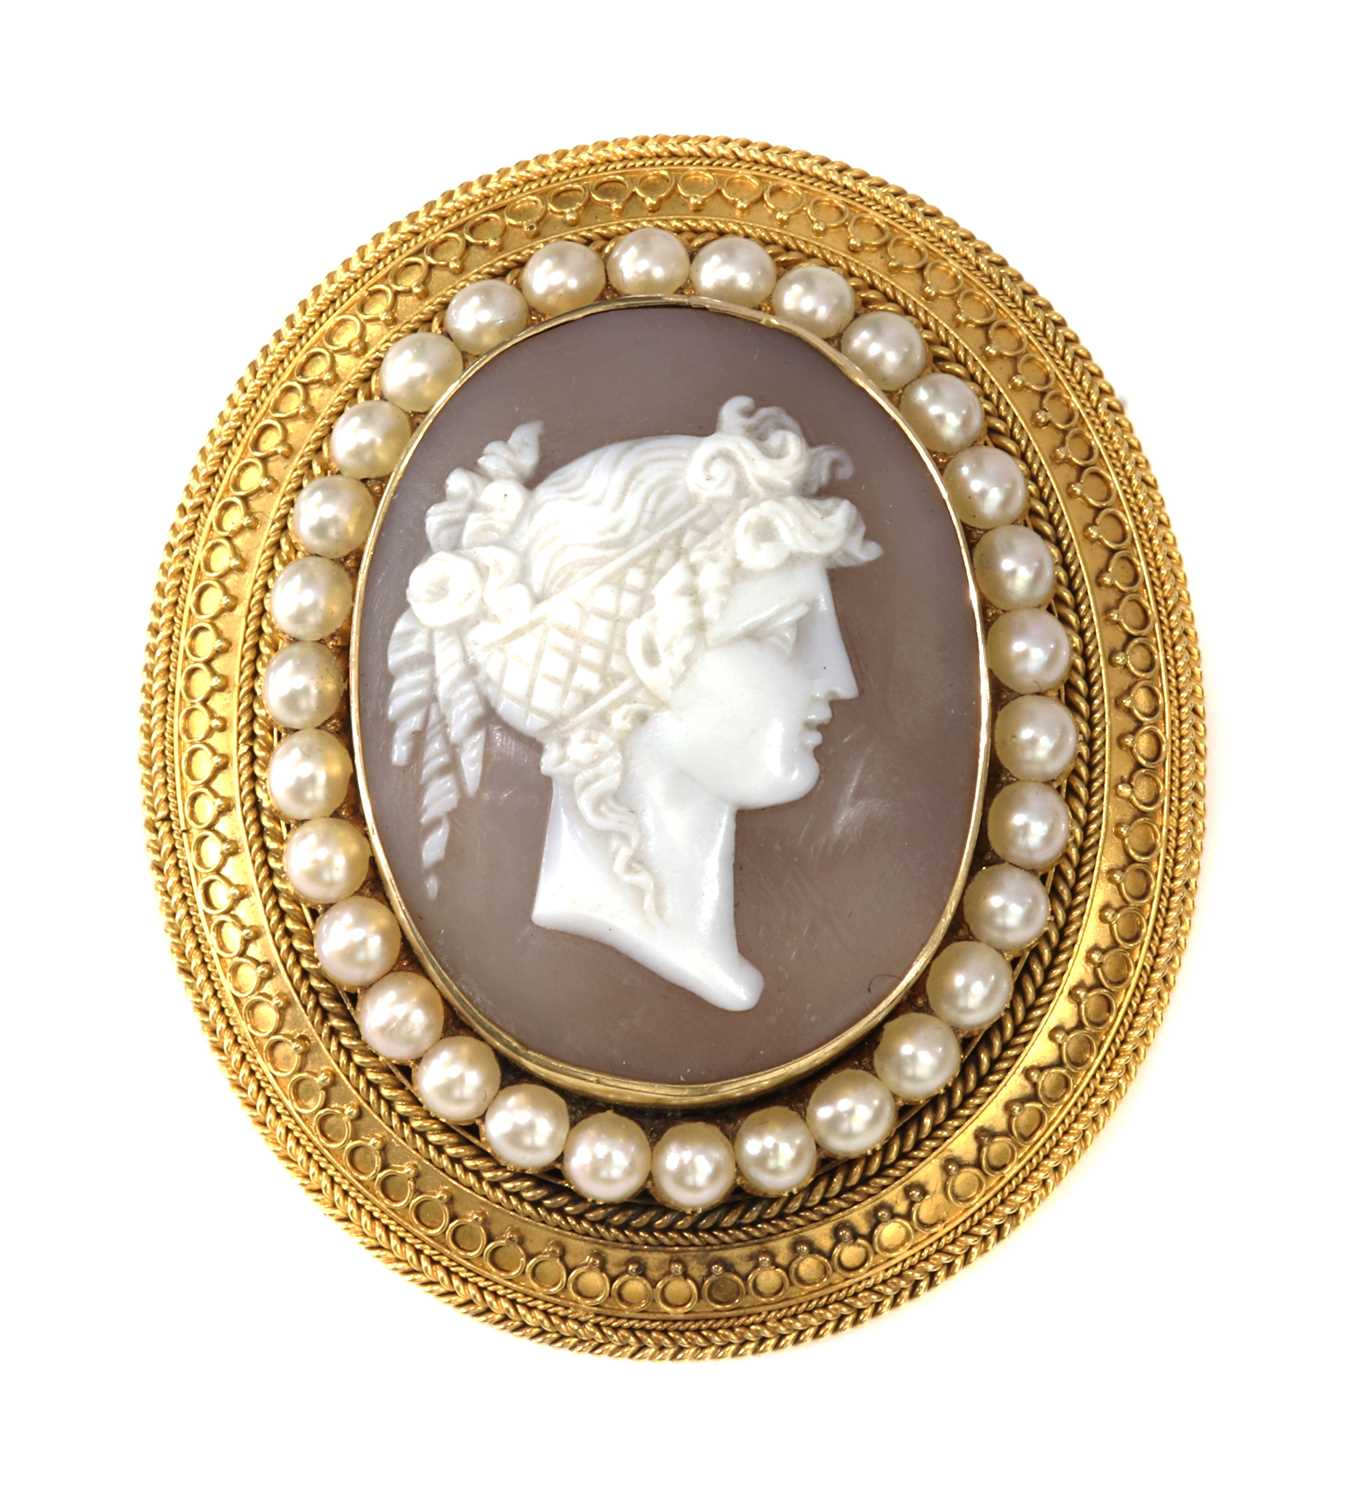 Lot 54 - A Victorian gold archaeological revival, Etruscan style, shell cameo and split pearl brooch, c.1870